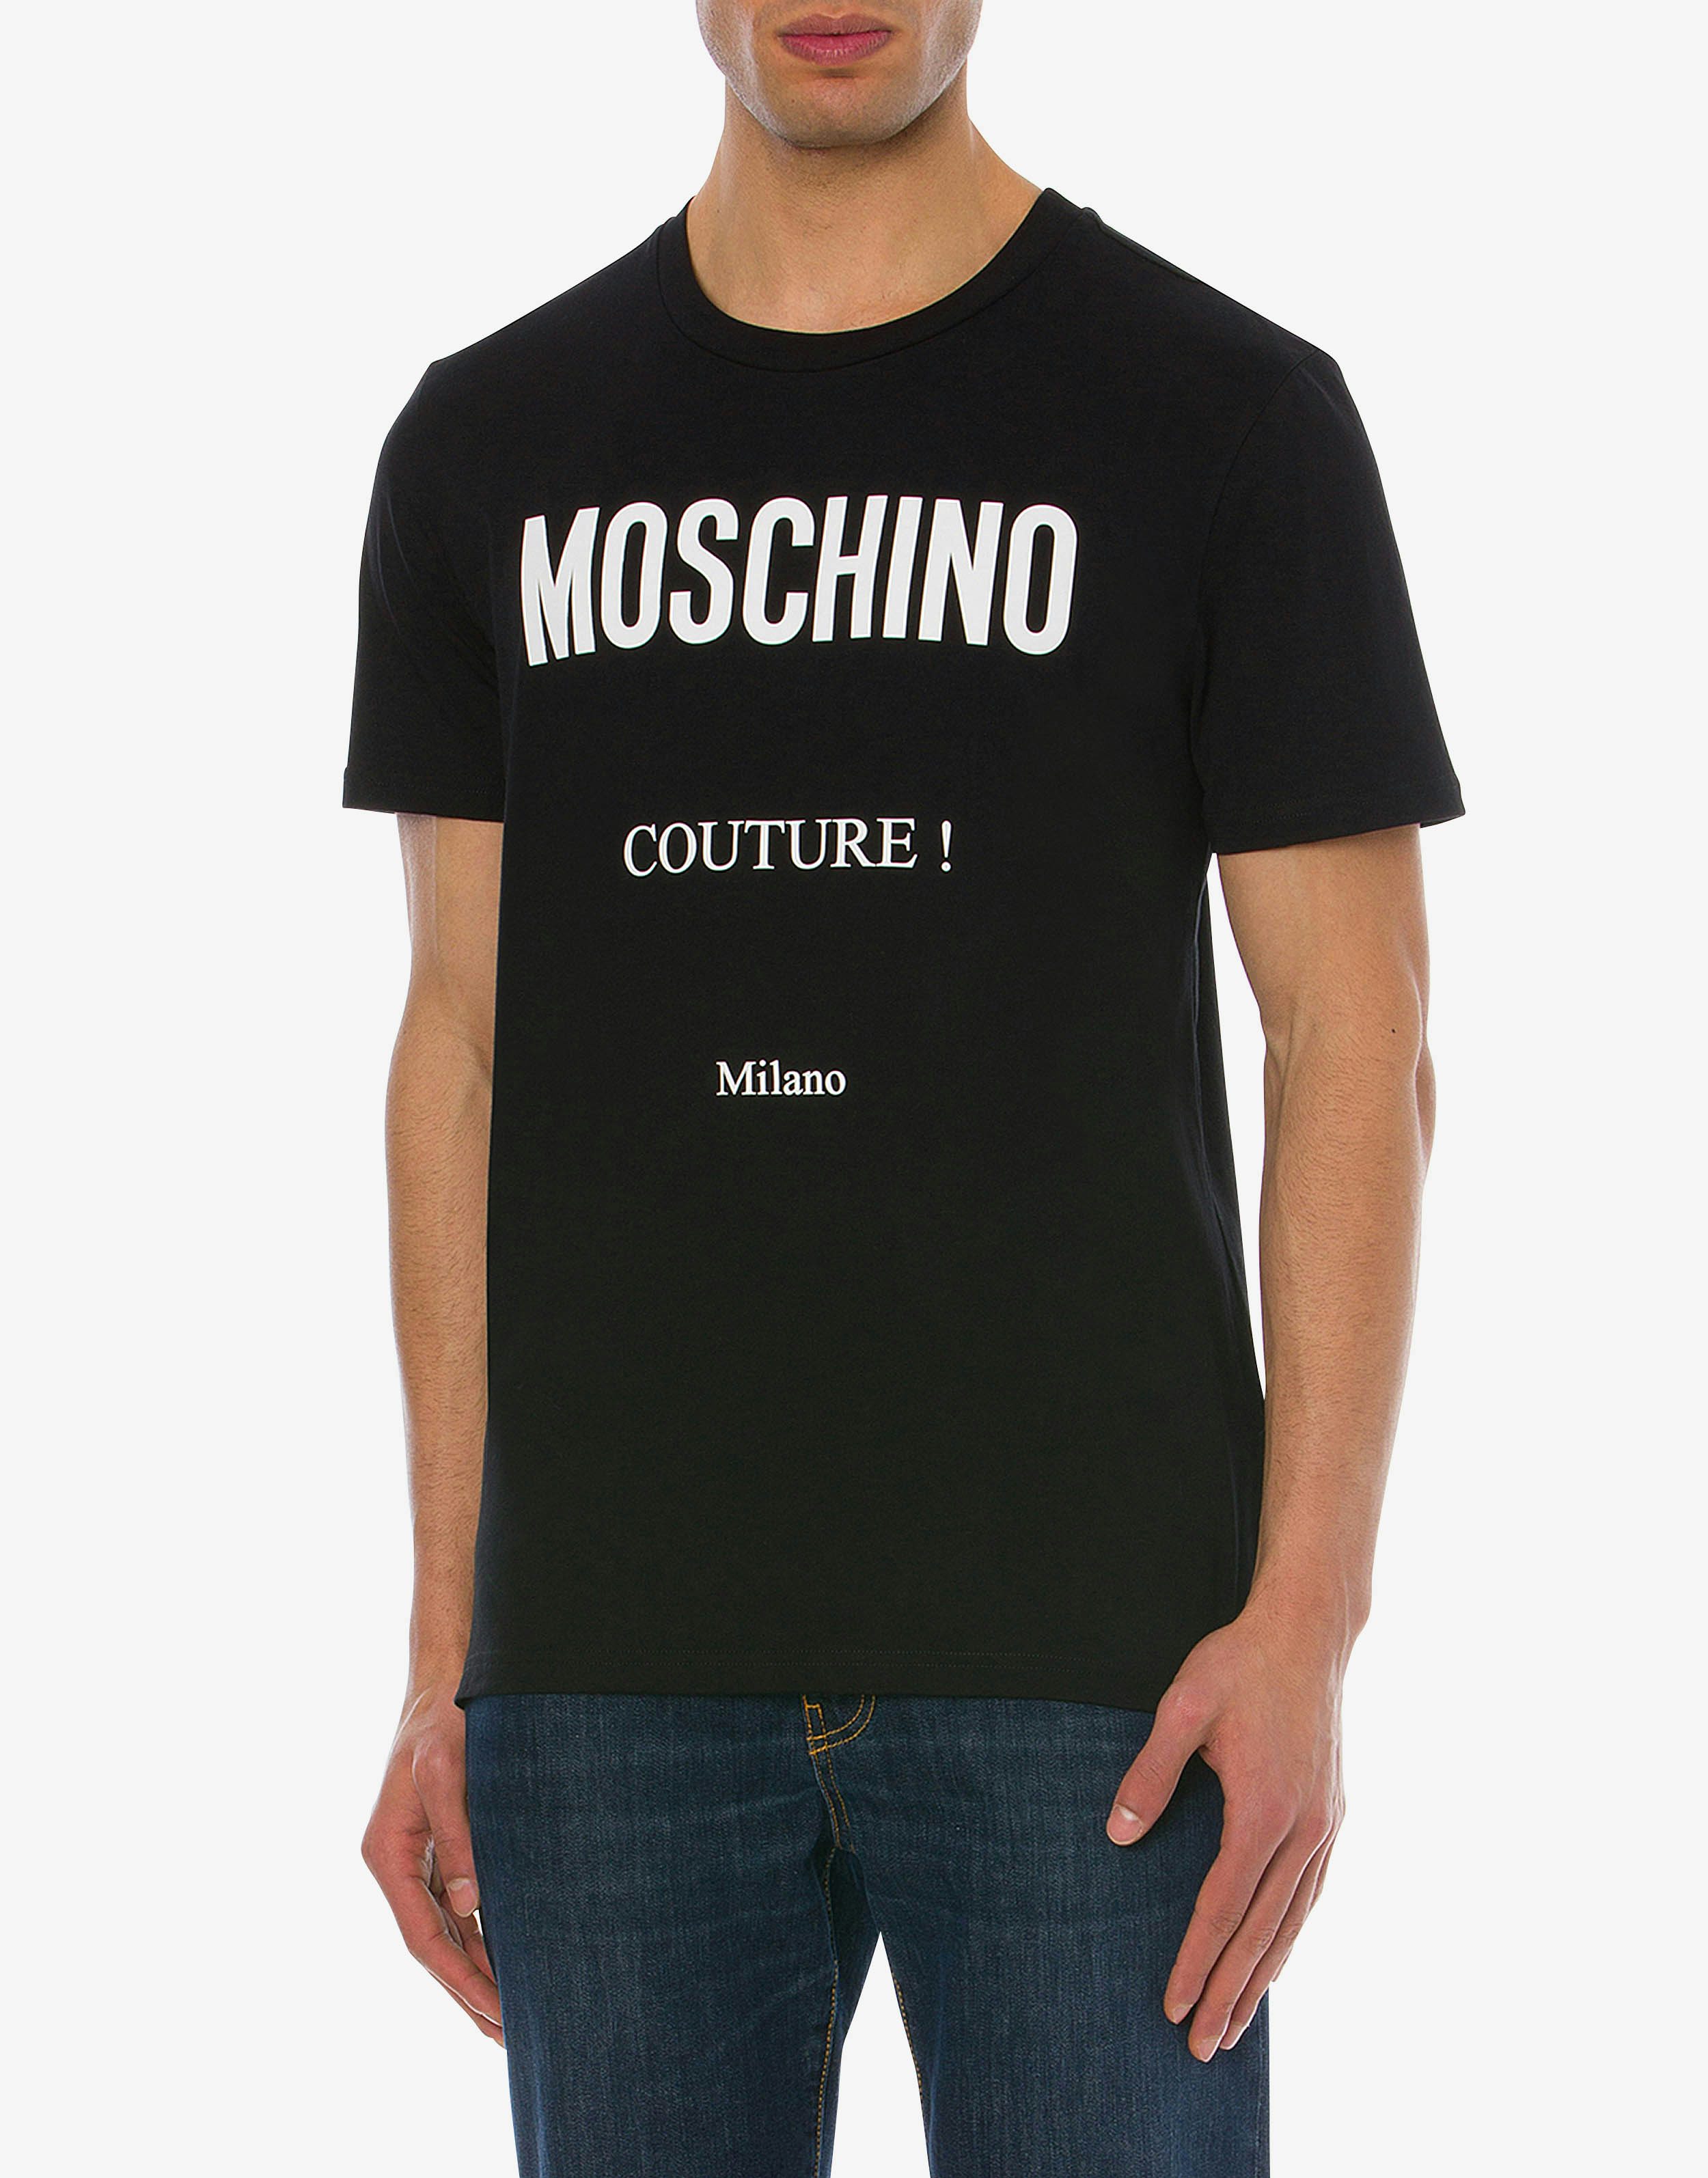 Jersey t-shirt Moschino Couture | Moschino Official Store